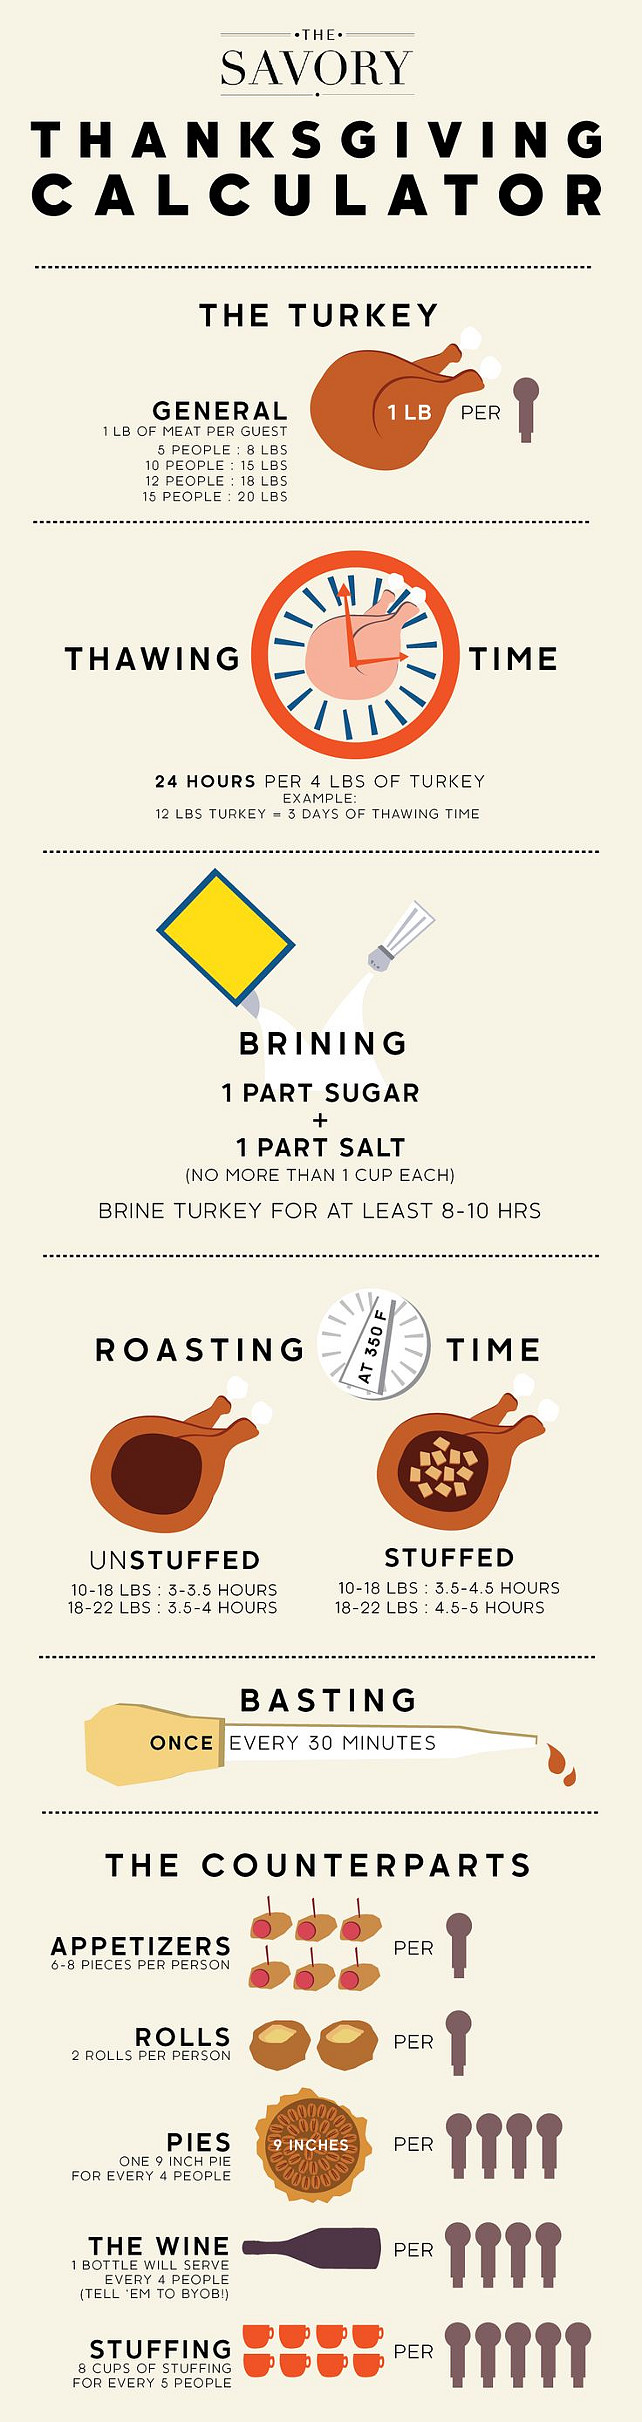 Thanksgiving Calculator. Caculate how much food to make for Thanksgiving. #Thanksgiving #ThanksgivingFood  